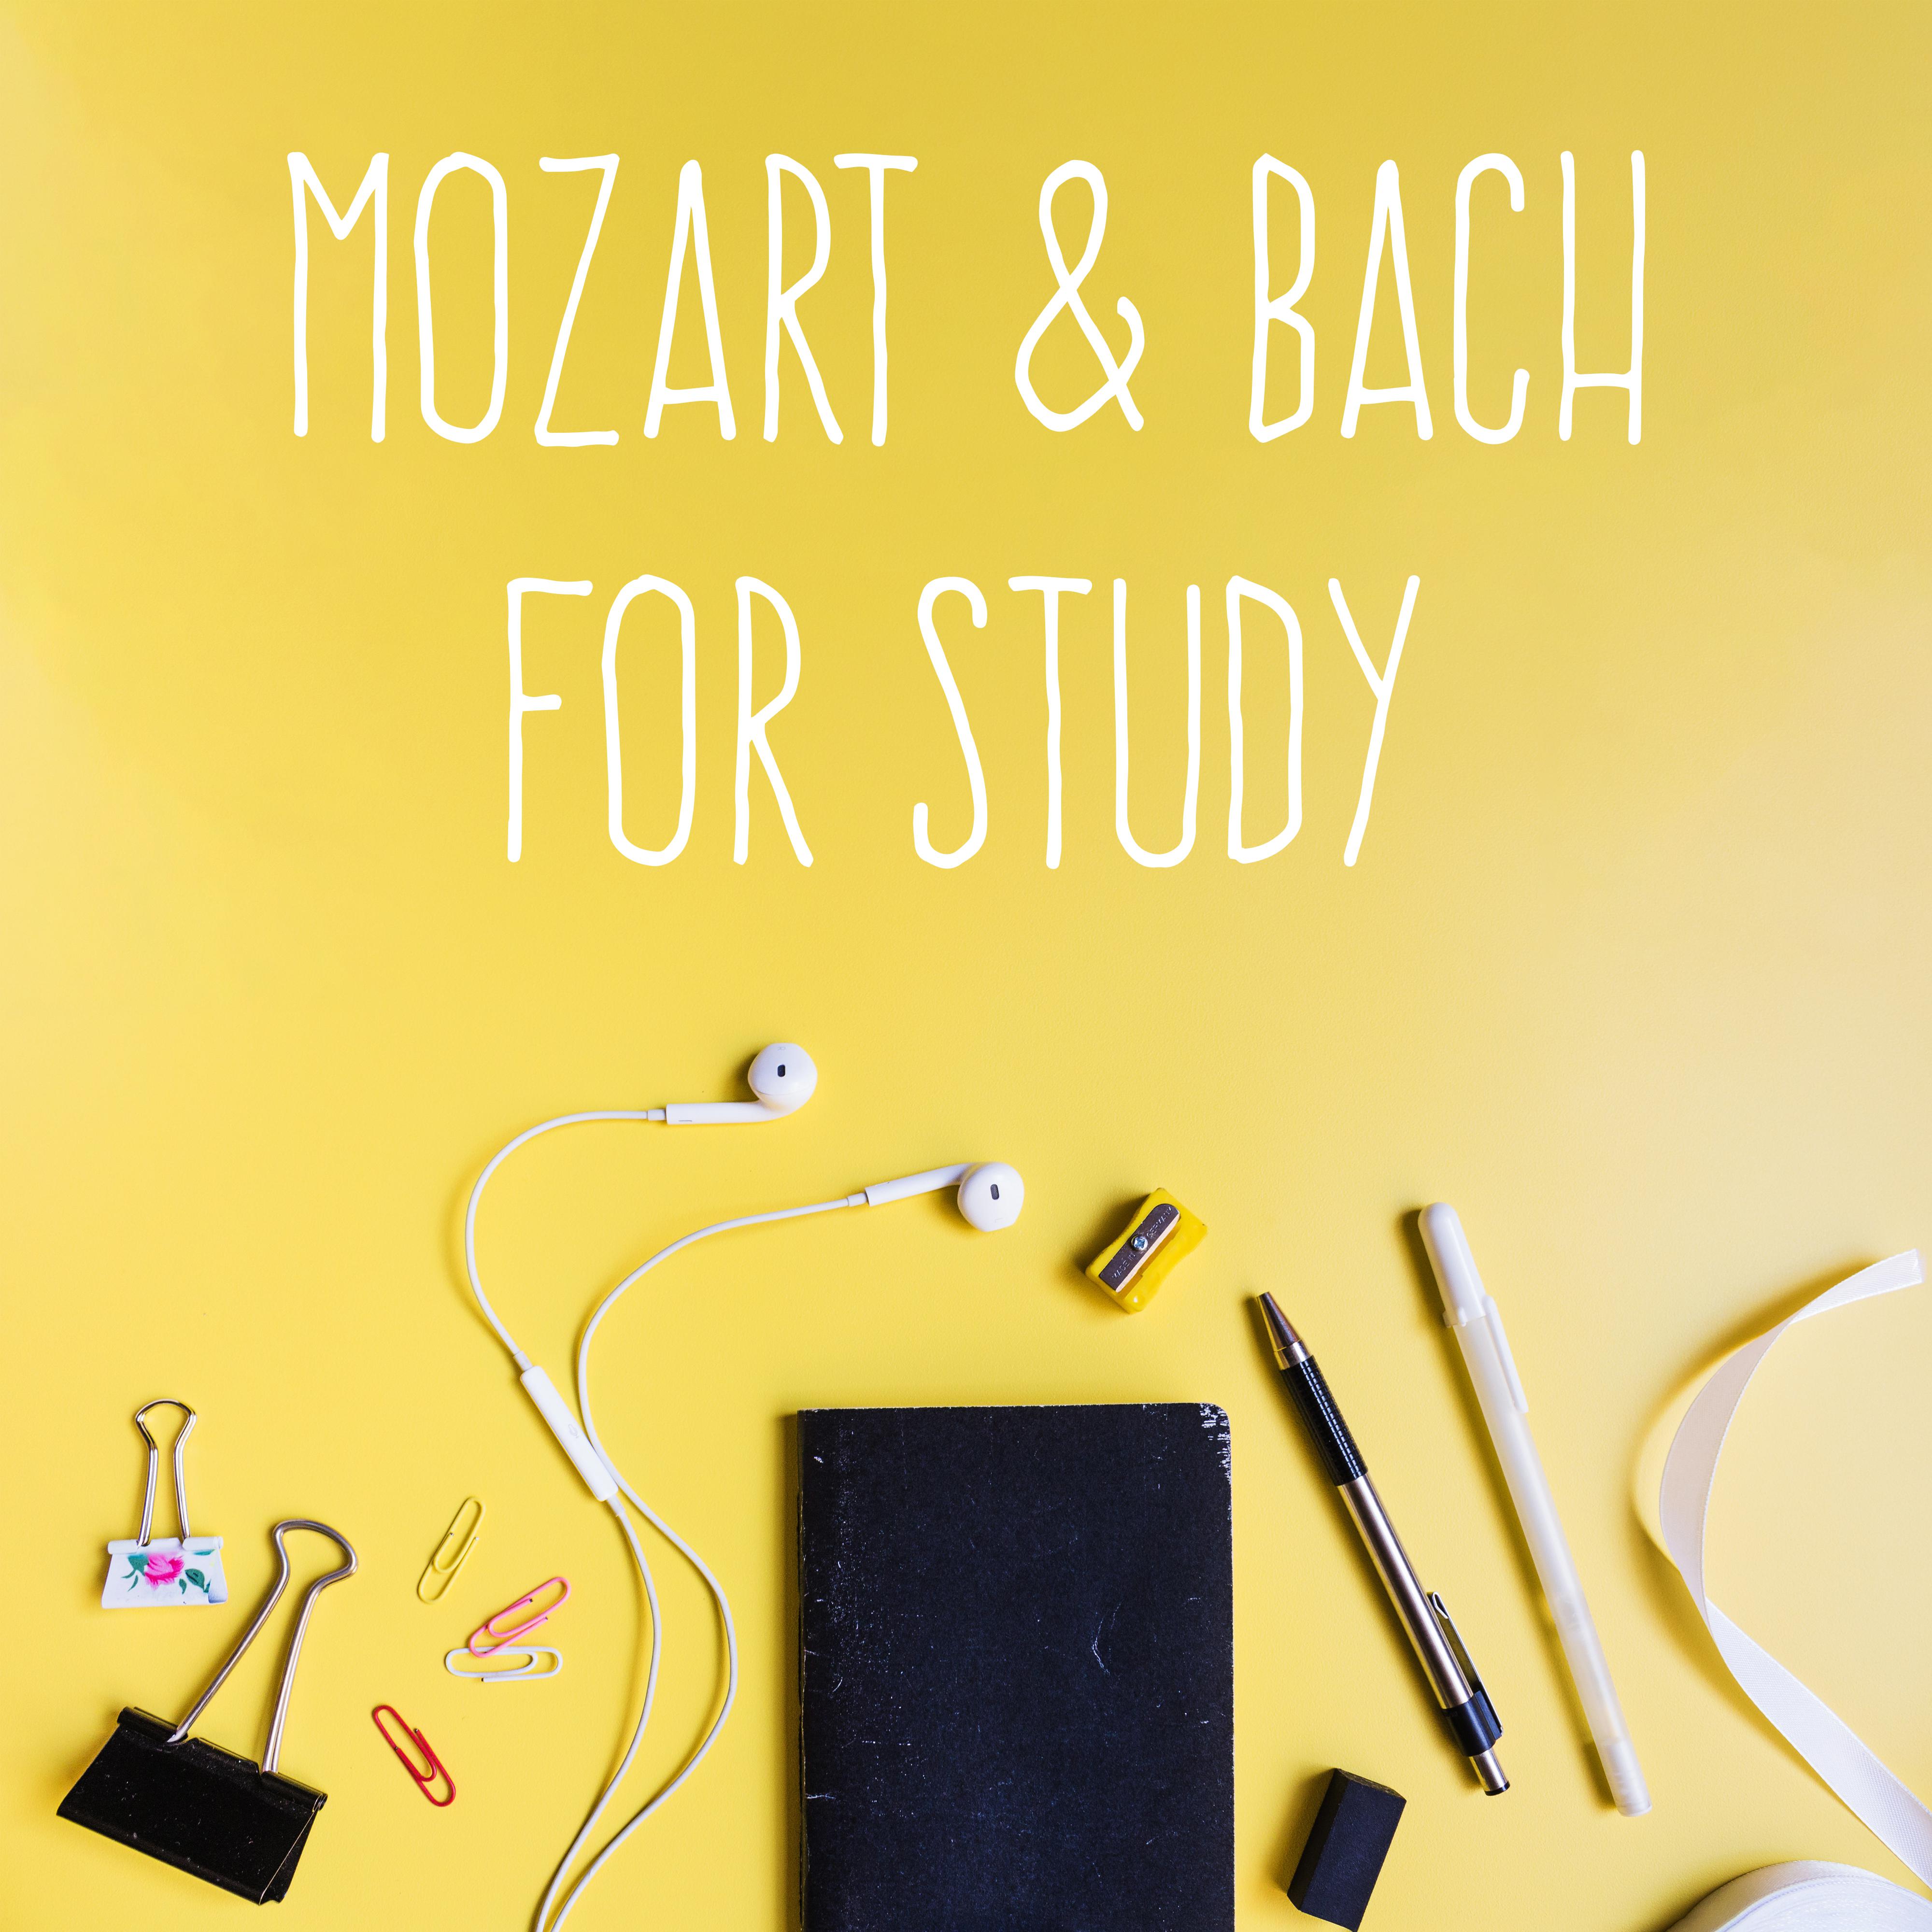 Mozart & Bach For Study